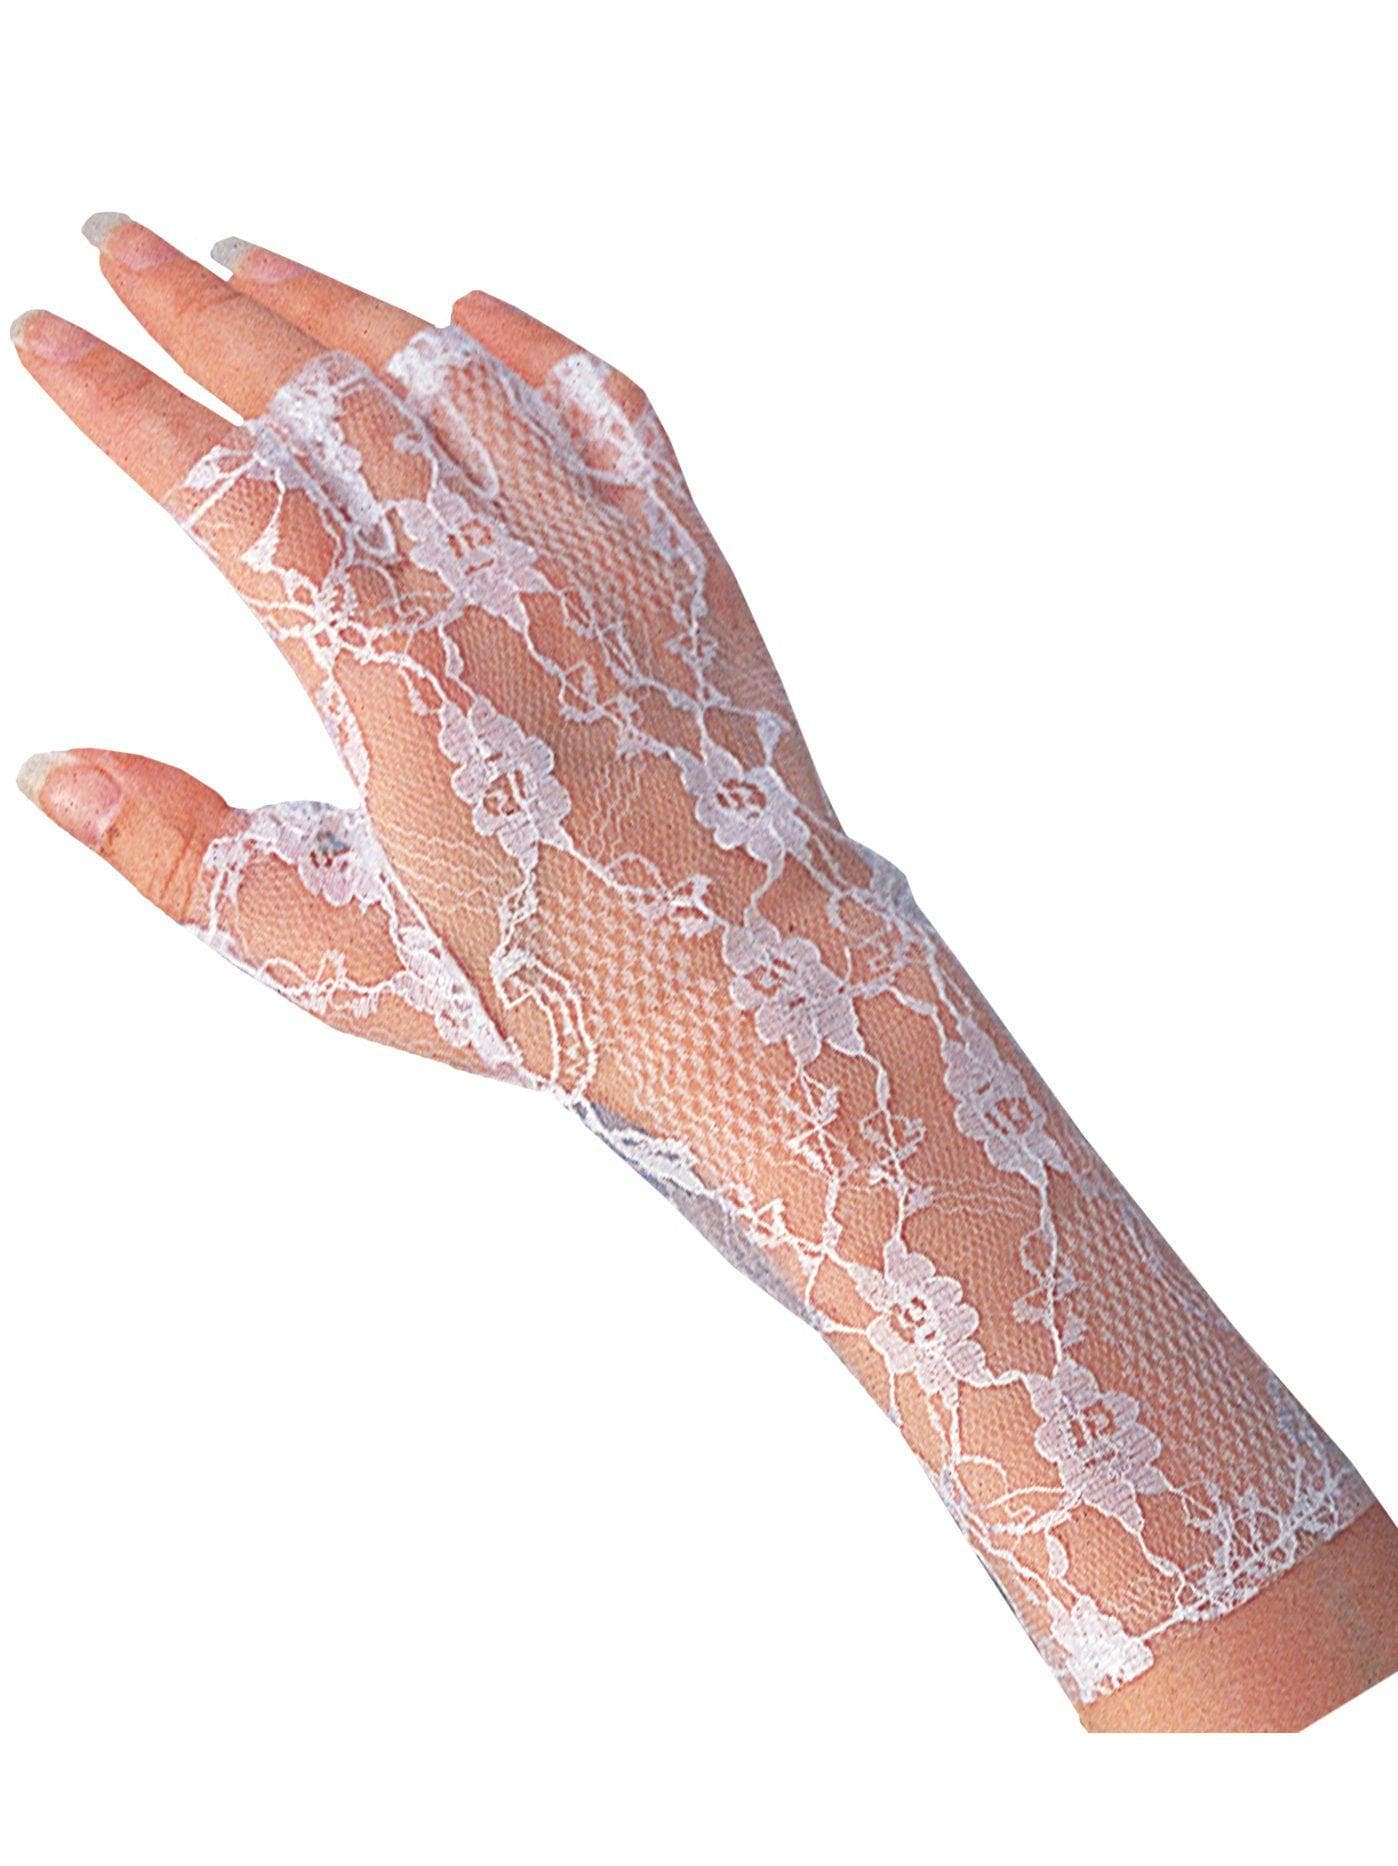 White Fingerless Lace Gloves - costumes.com